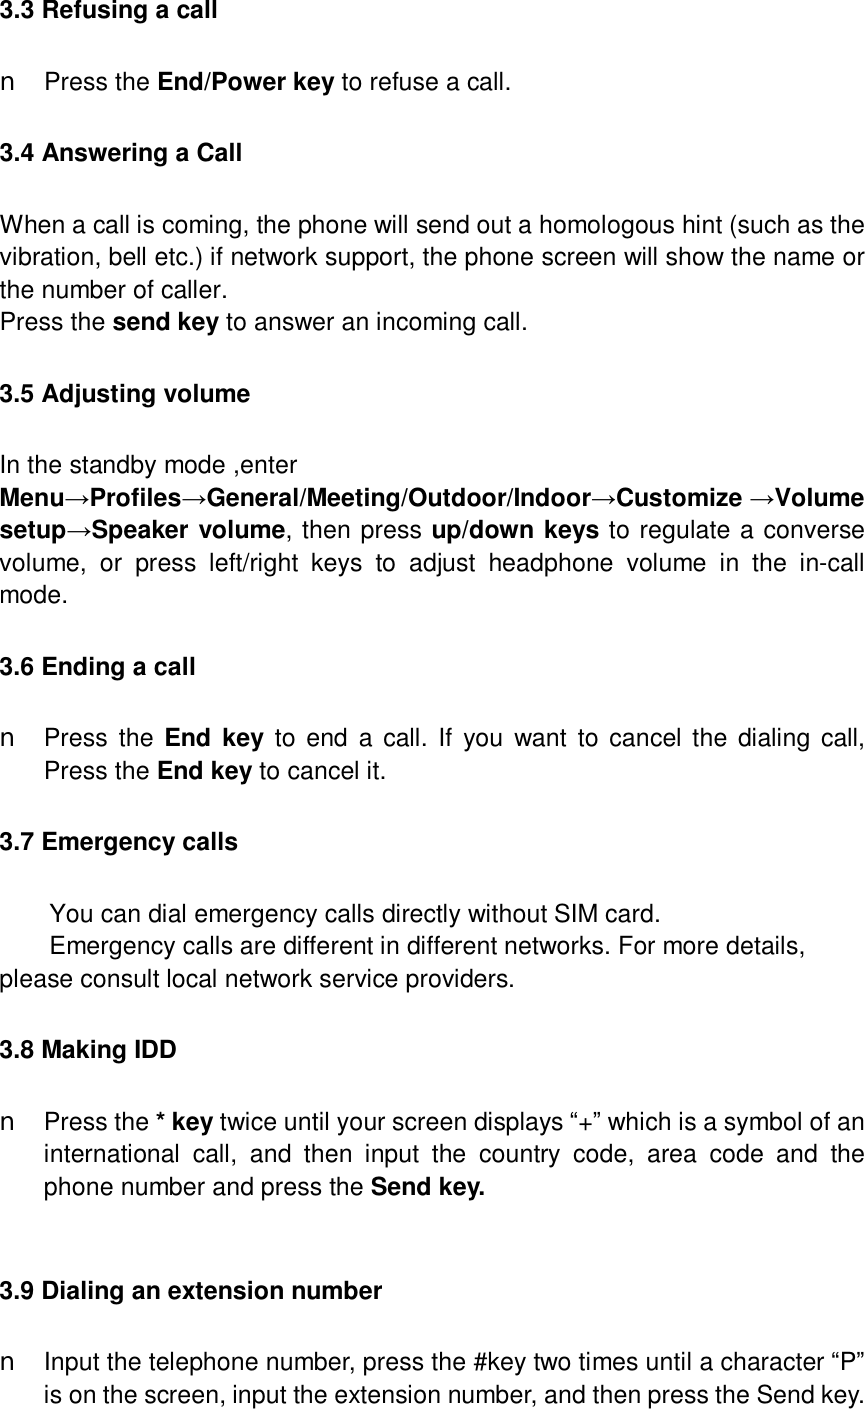  3.3 Refusing a call n Press the End/Power key to refuse a call. 3.4 Answering a Call When a call is coming, the phone will send out a homologous hint (such as the vibration, bell etc.) if network support, the phone screen will show the name or the number of caller. Press the send key to answer an incoming call. 3.5 Adjusting volume In the standby mode ,enter  Menu→Profiles→General/Meeting/Outdoor/Indoor→Customize →Volume setup→Speaker volume, then press up/down keys to regulate a converse volume, or press left/right keys to adjust headphone volume in the in-call mode. 3.6 Ending a call n Press the  End key to end a call. If you want to cancel the dialing call, Press the End key to cancel it. 3.7 Emergency calls You can dial emergency calls directly without SIM card. Emergency calls are different in different networks. For more details, please consult local network service providers. 3.8 Making IDD n Press the * key twice until your screen displays “+” which is a symbol of an international call, and then input the country code, area code and the phone number and press the Send key.  3.9 Dialing an extension number n Input the telephone number, press the #key two times until a character “P” is on the screen, input the extension number, and then press the Send key. 